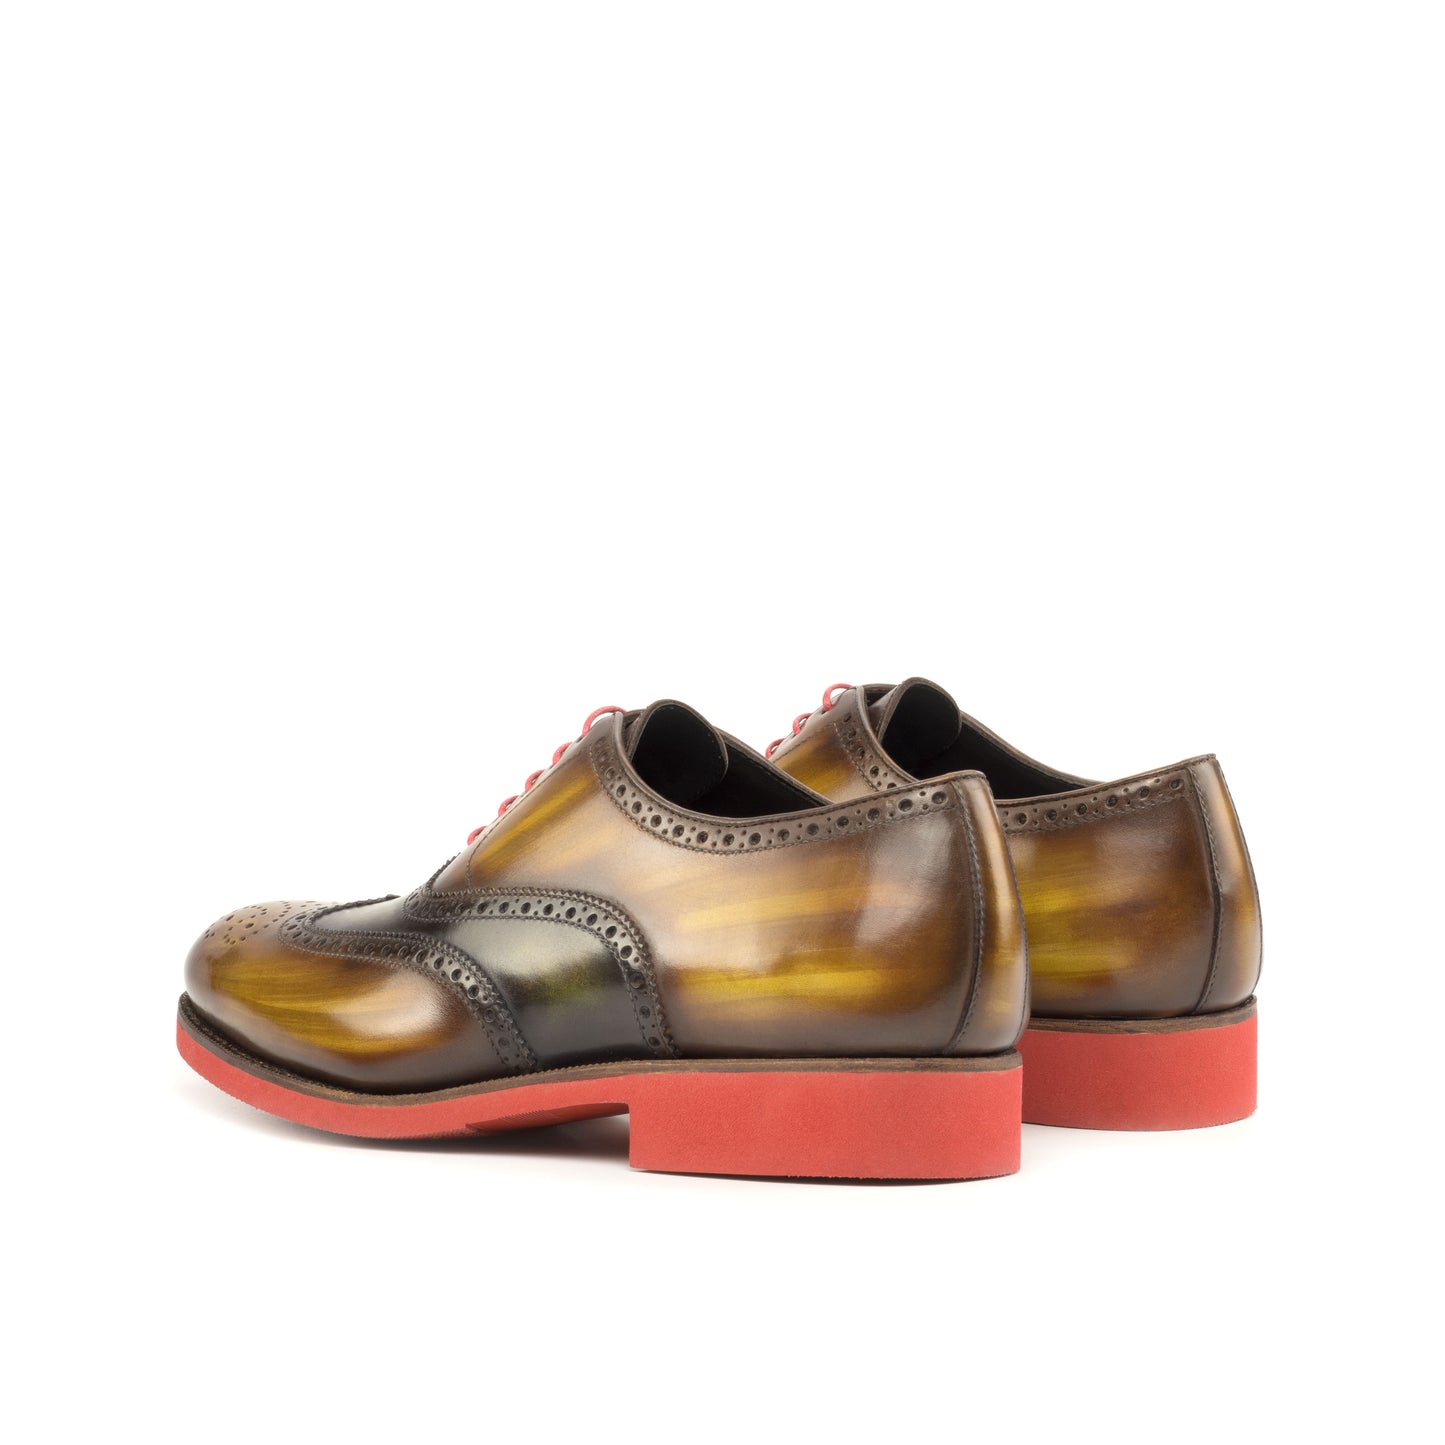 SUITCAFE Full Brogue Cognac and Green Leather Patina Red Sole Men's Shoe